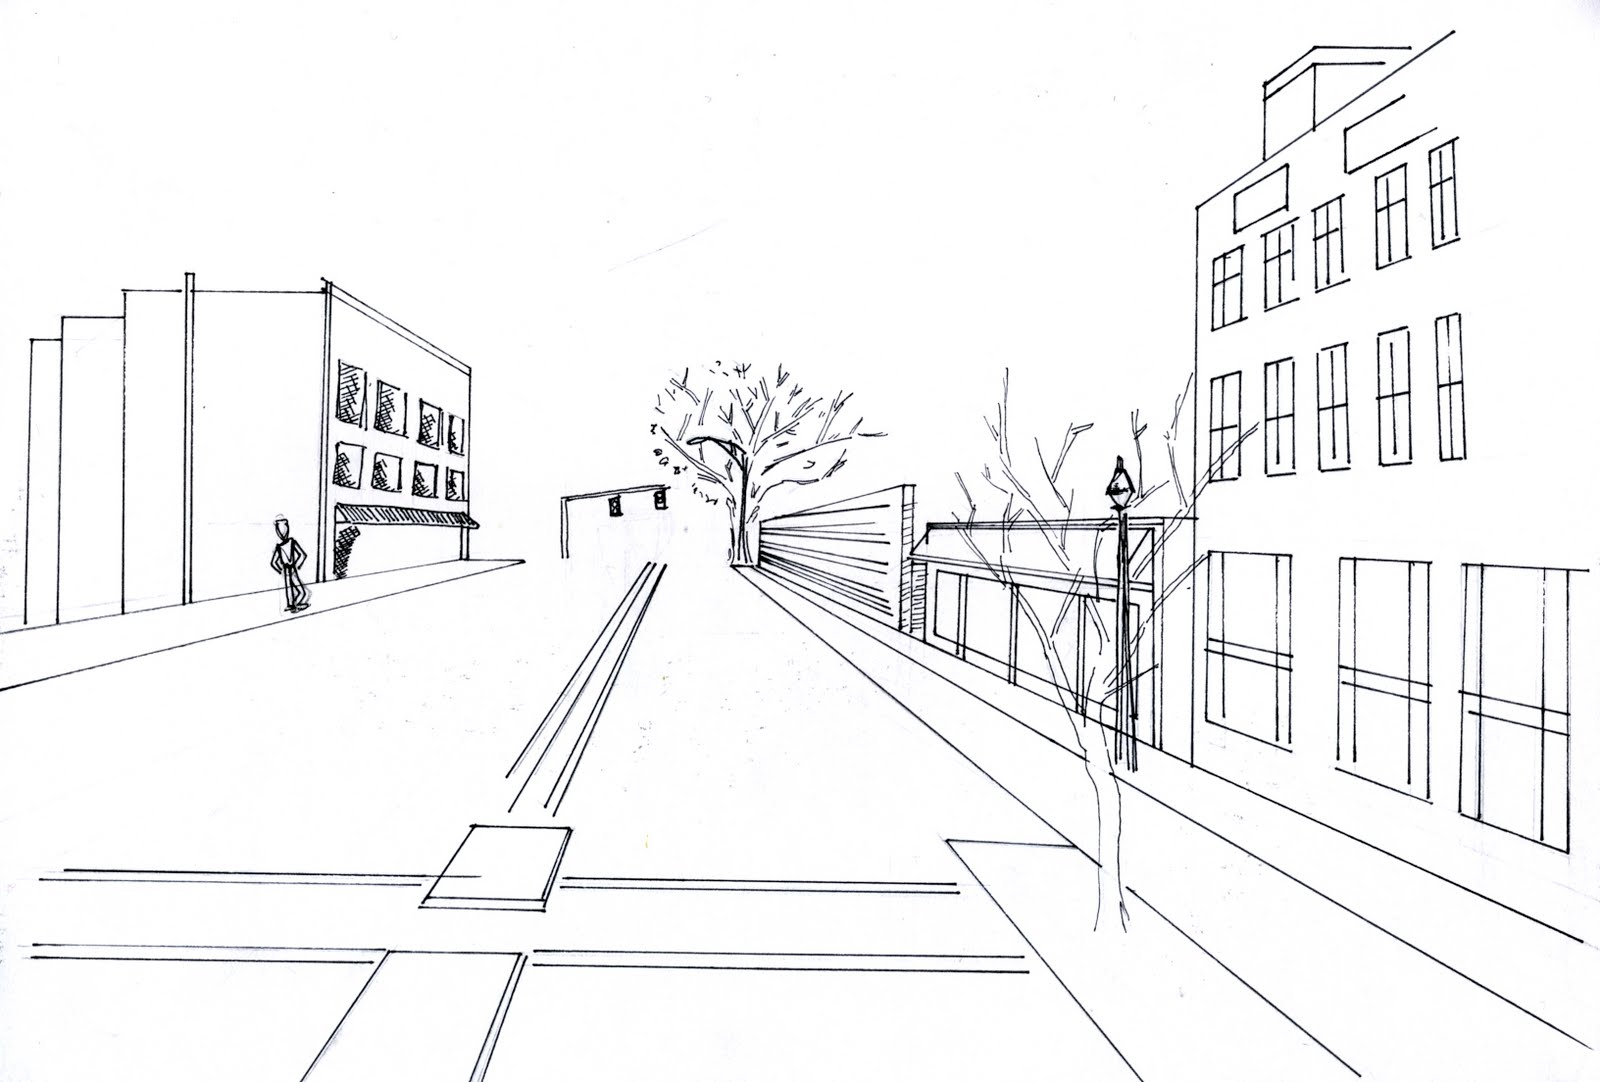 cmb: Perspective Drawings: Downtown Greensboro